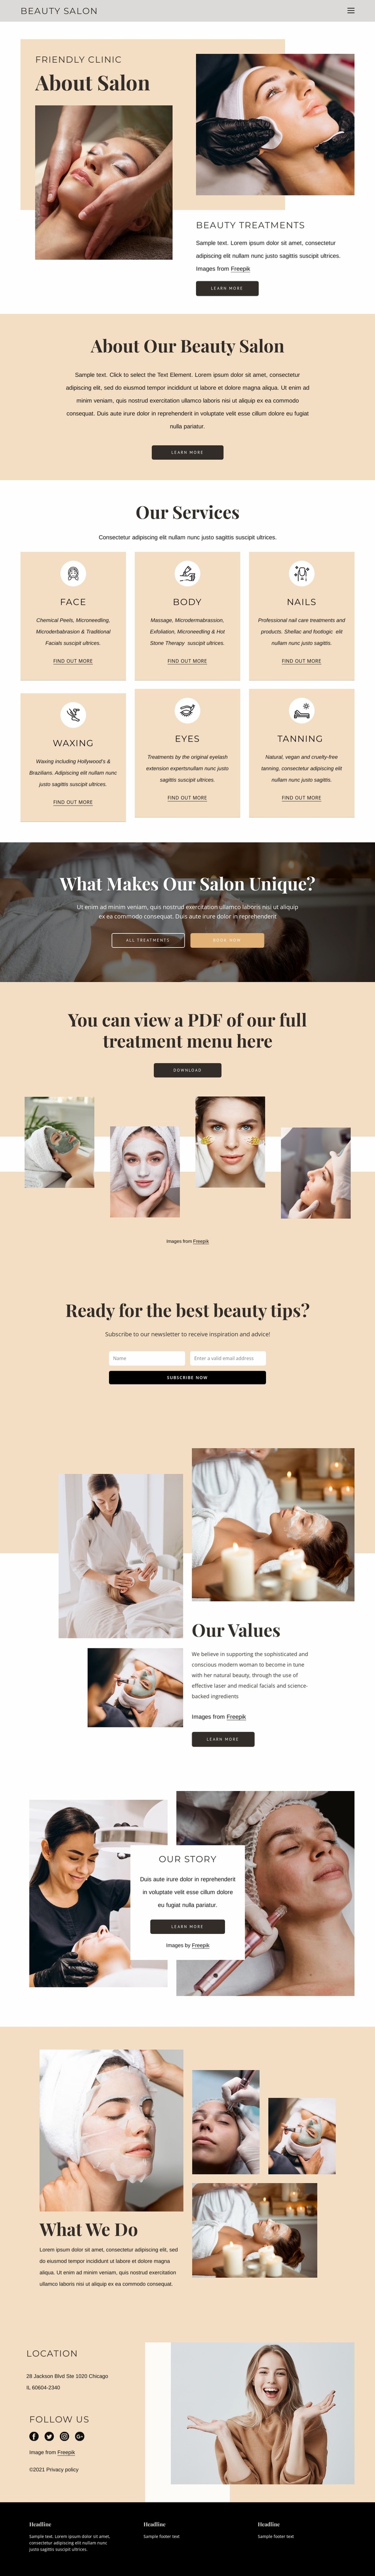 Beauty and aesthetic treatments eCommerce Template